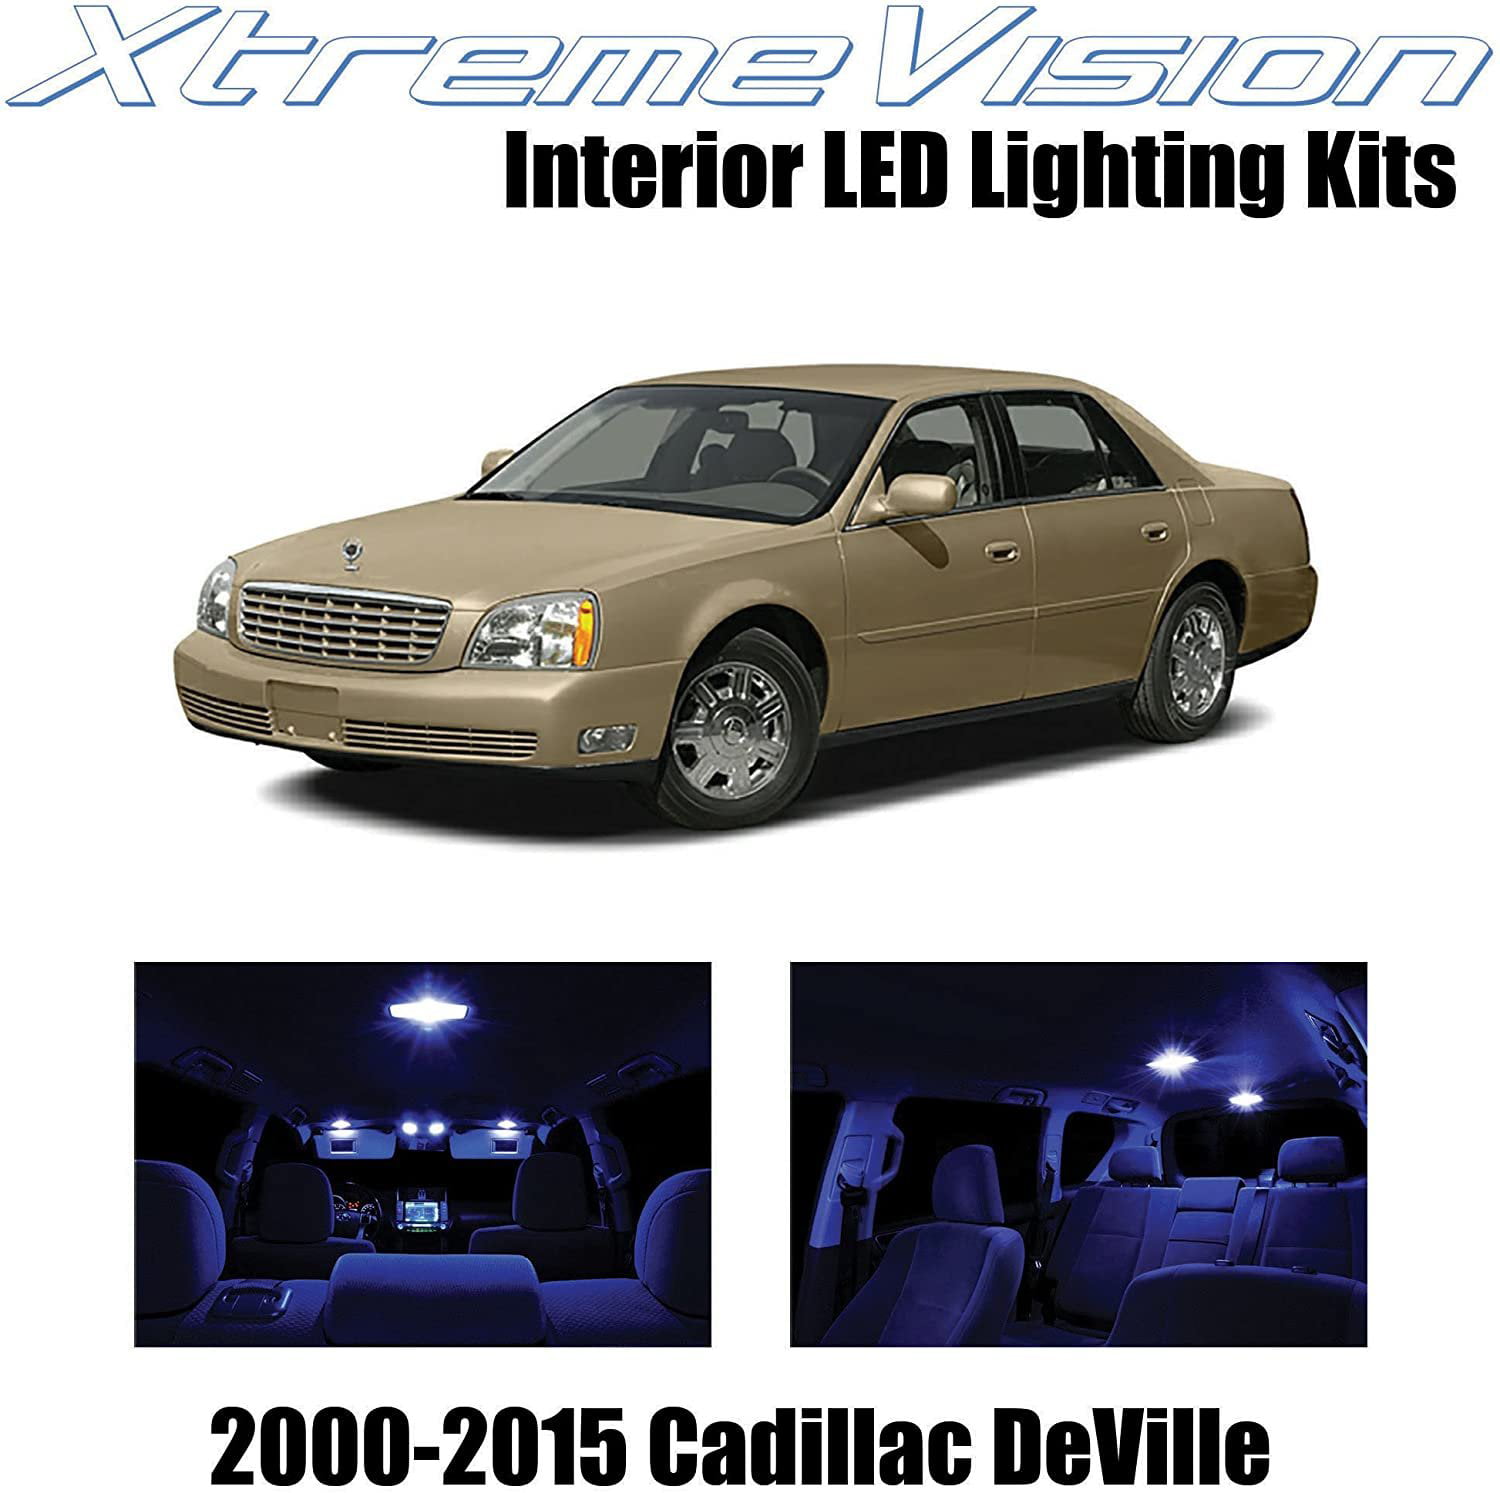 16x Blue LED Lights Interior Package Kit for 2000-2005 Cadillac DeVille